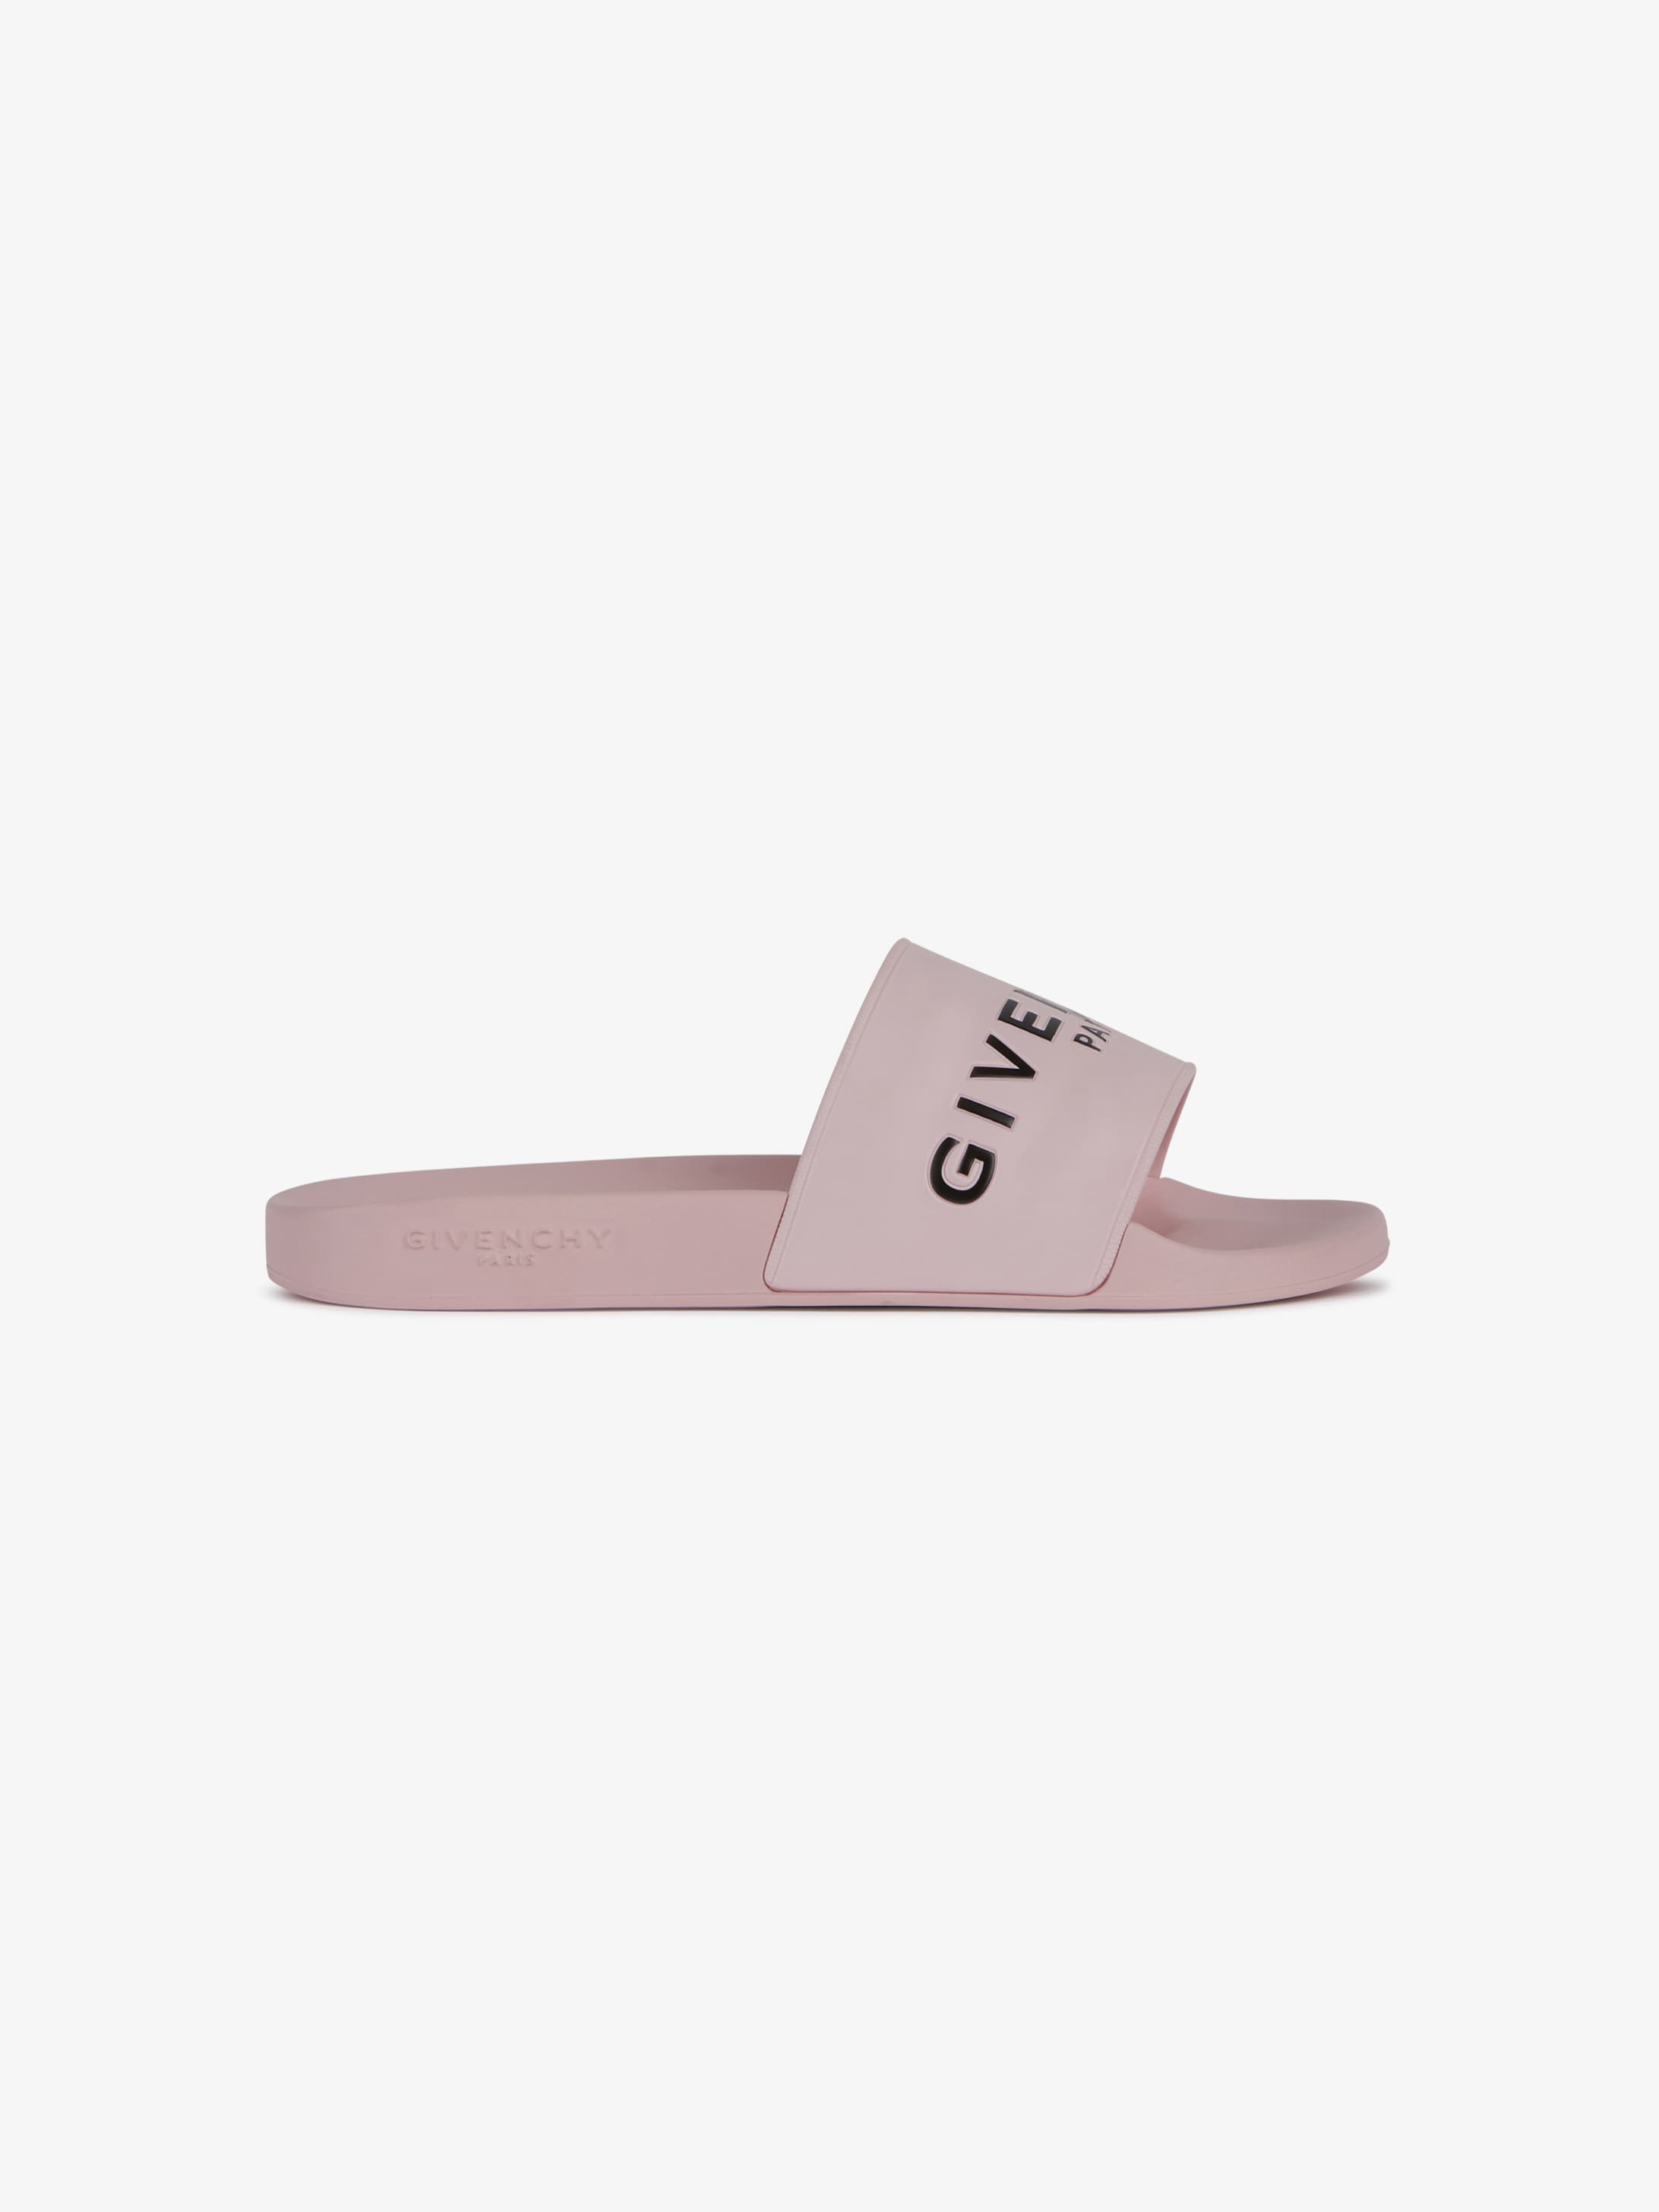 flat sandals in givenchy paris rubber